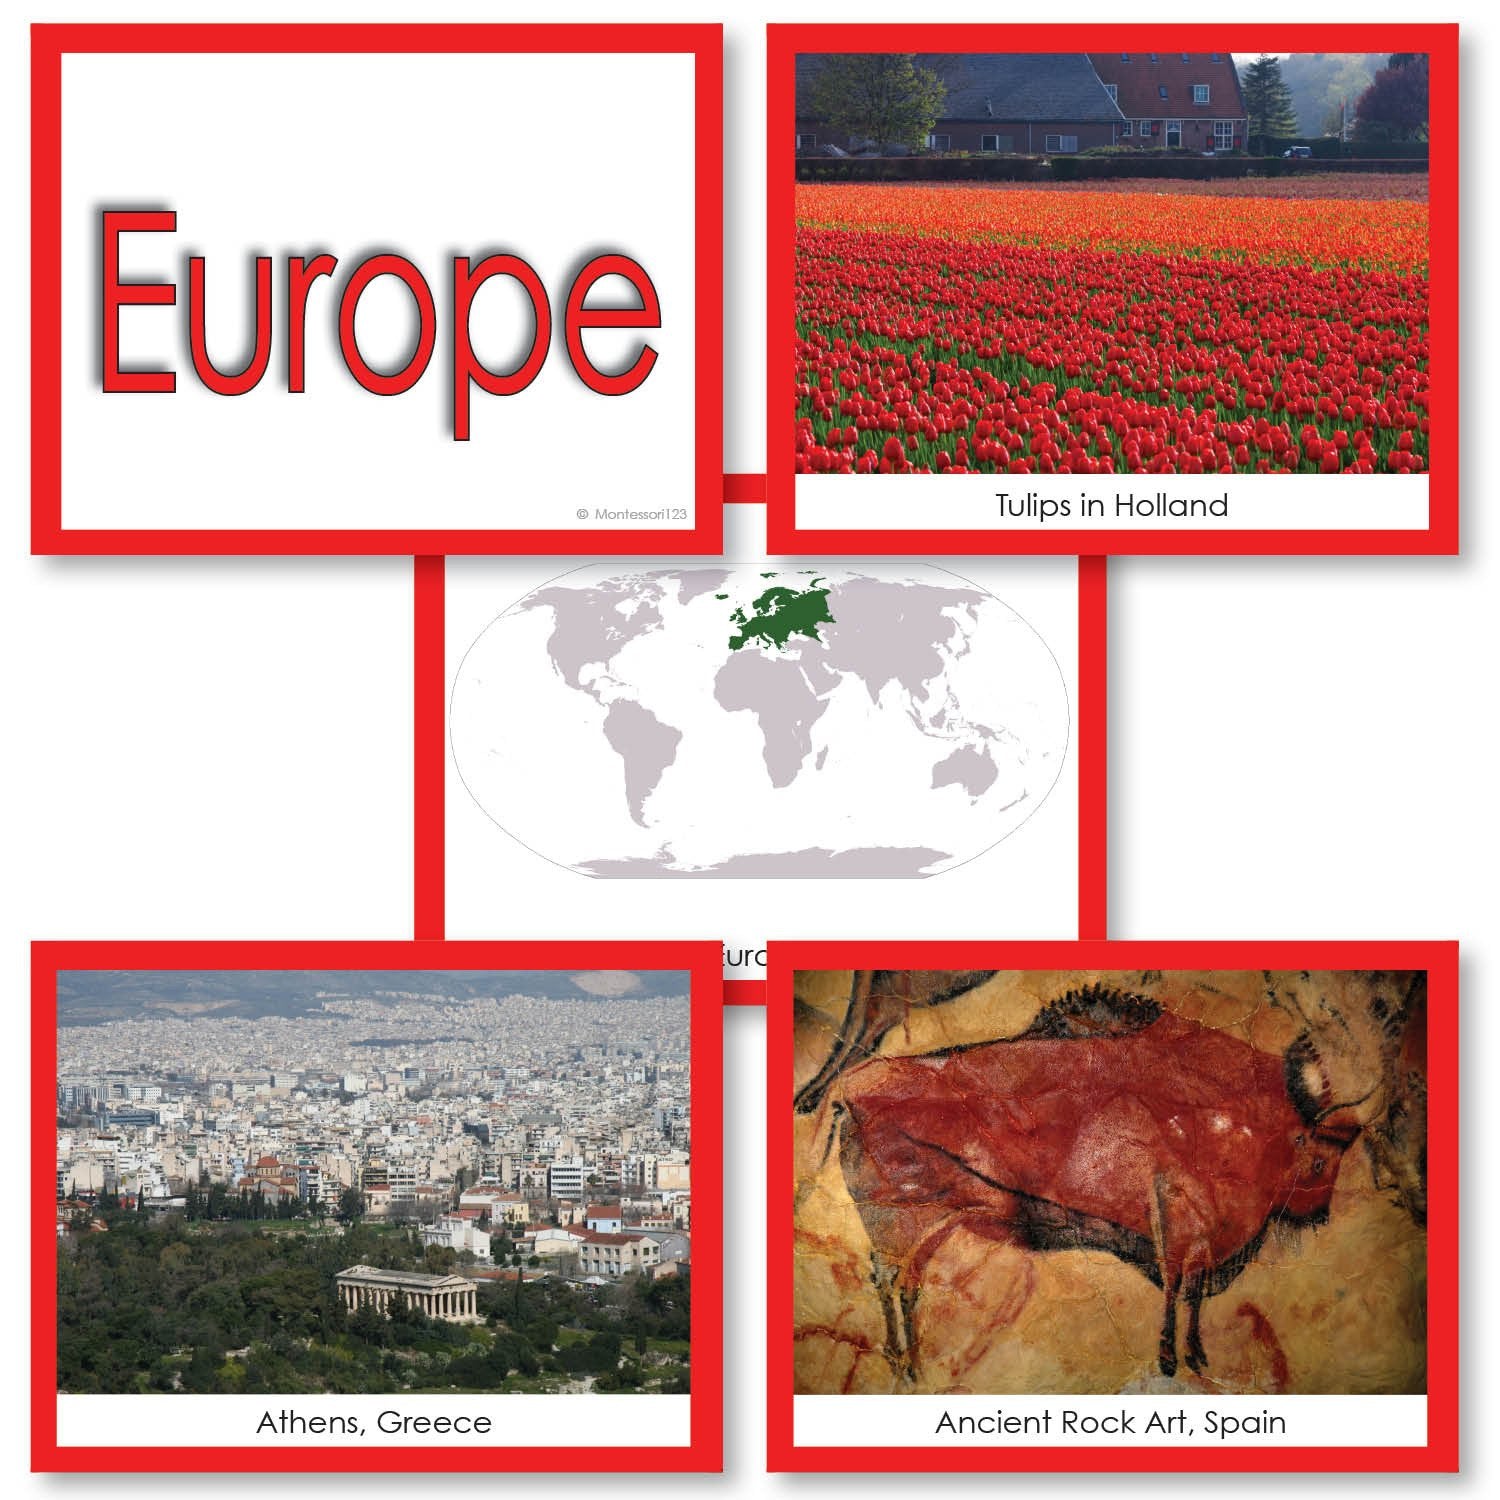 Geography Material-Study Of World Geography - Image Folder Of The Continent Europe